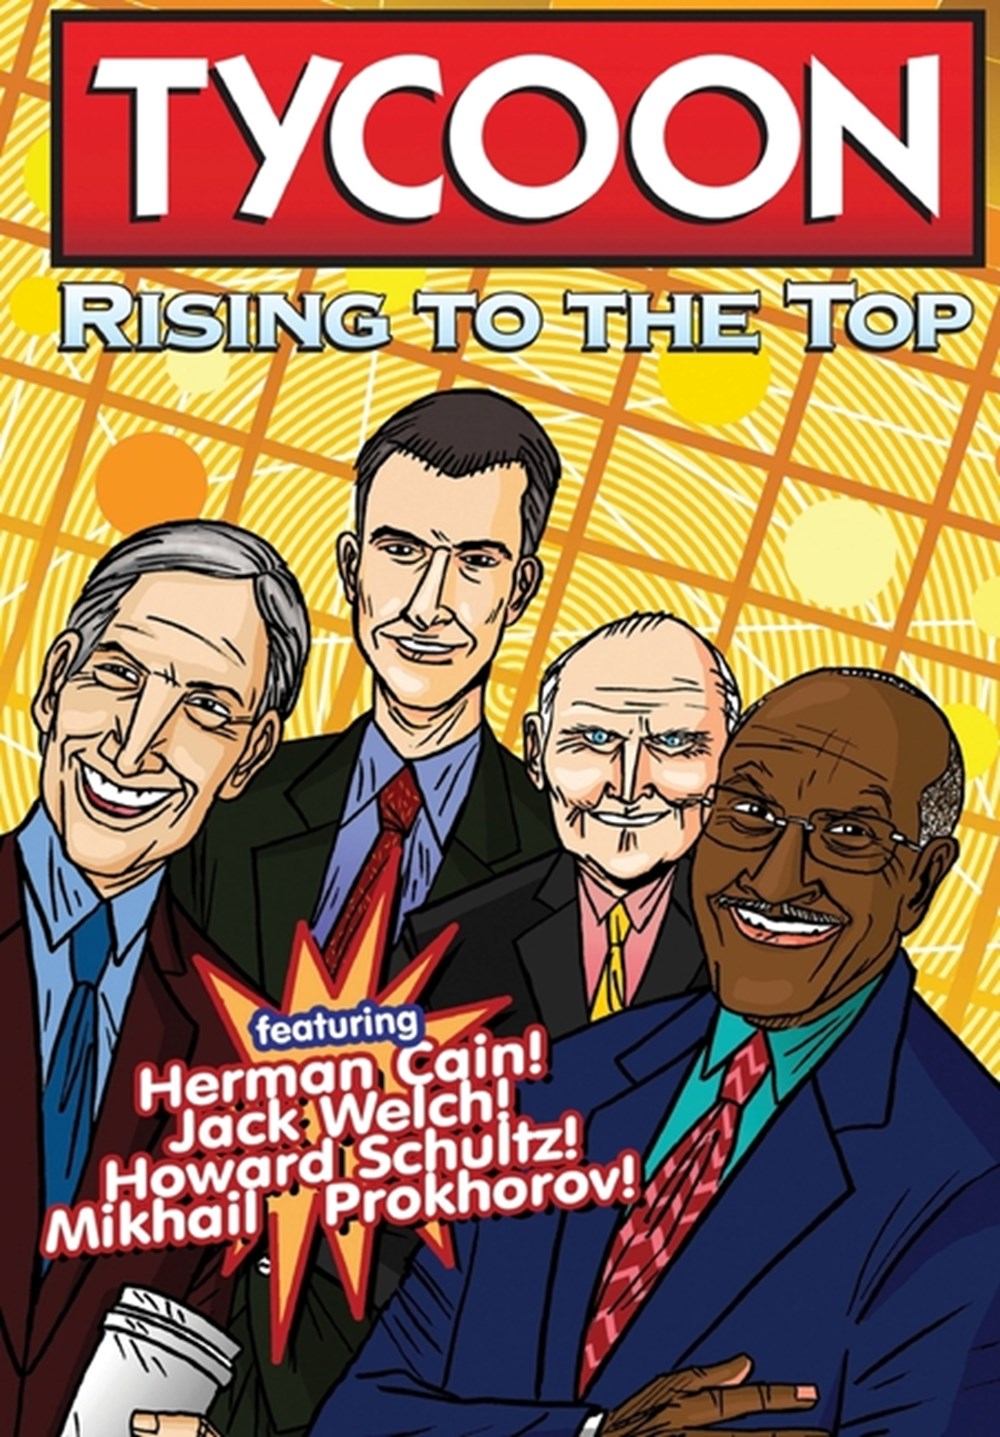 Orbit: Tycoon: Rise to the Top: Mikhail Prokhorov, Howard Schultz, Jack Welch, and Herman Cain